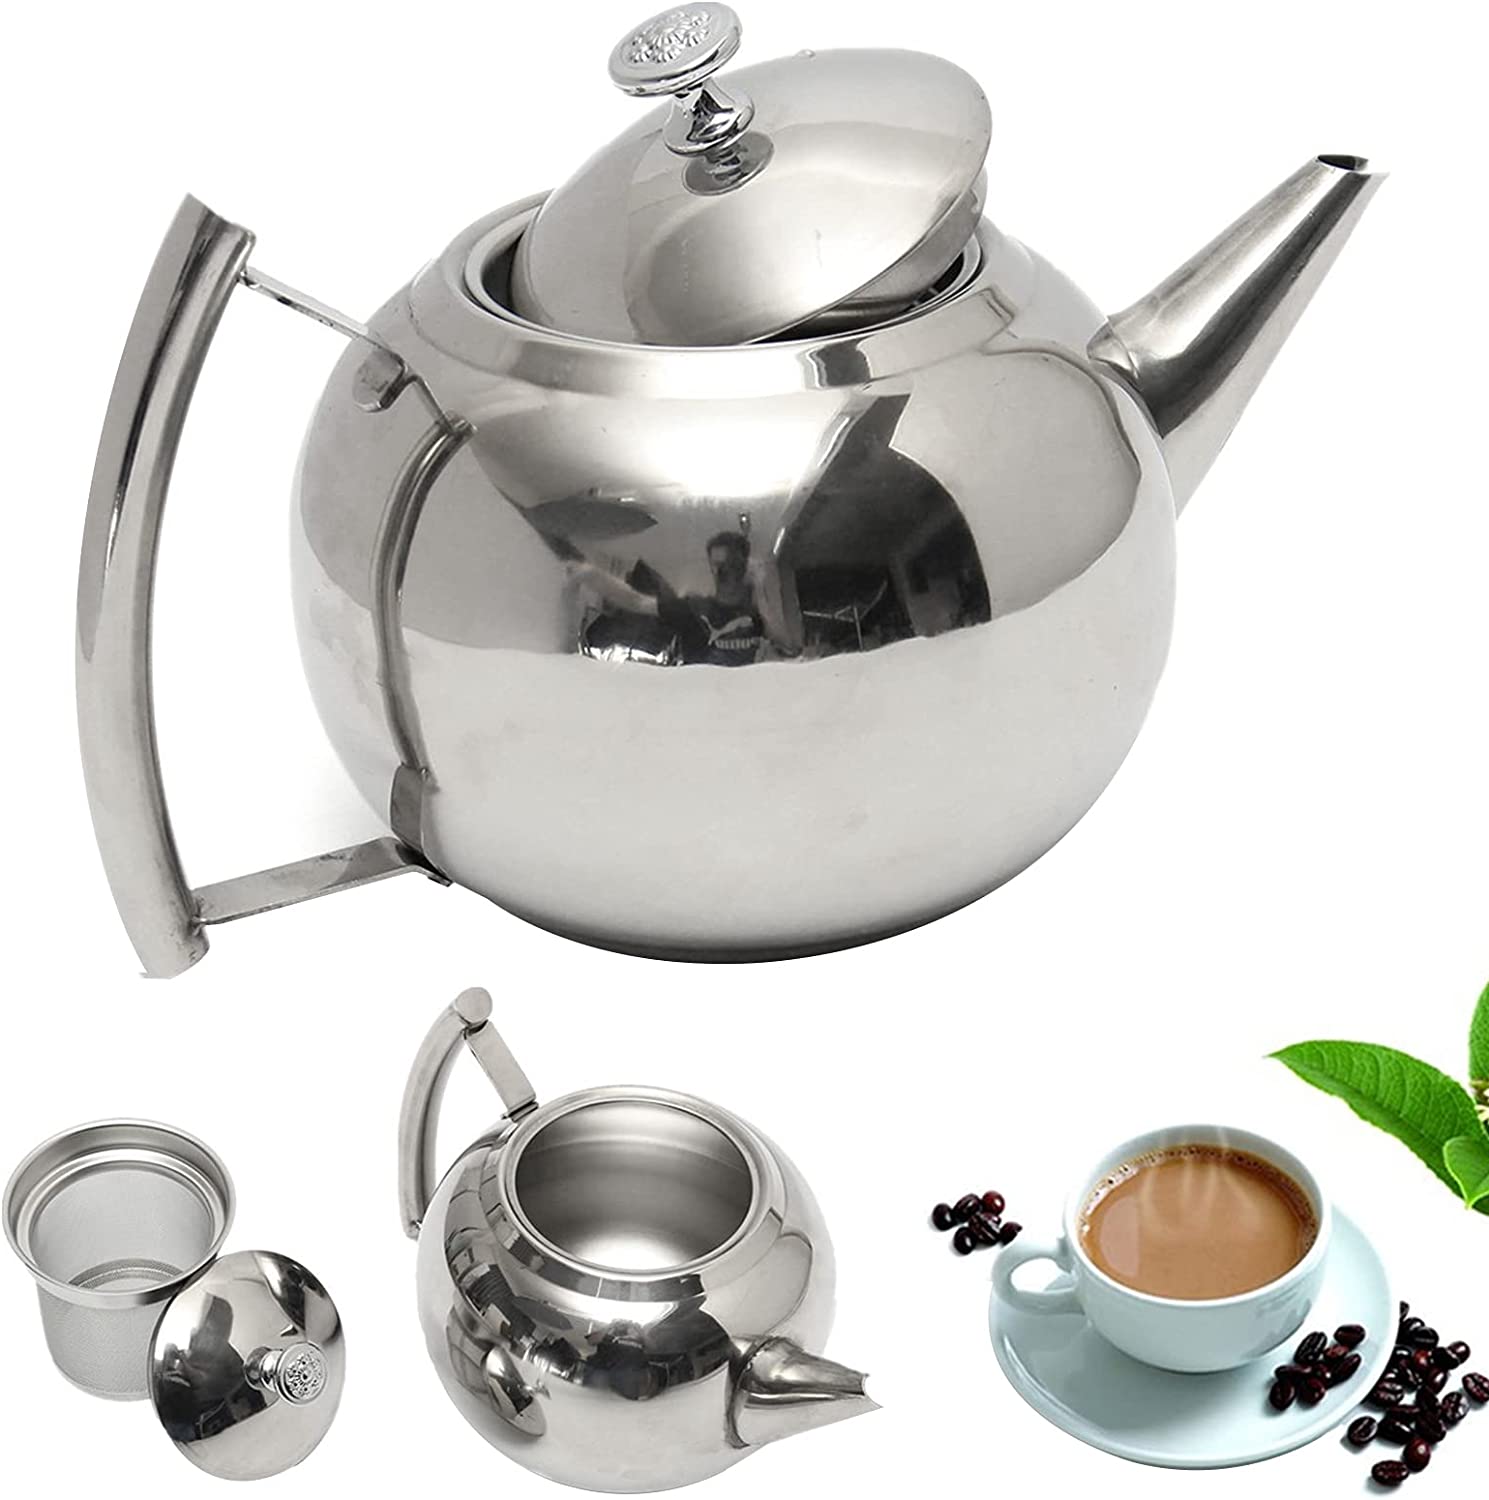 Stainless Steel Teapot with Strainer Insert, 1.5 L/2 Litre Kettle Coffee Pot with Lid and Carry Handle, Heated Tea Maker for All Scented Tea and Infusion Tea (2 L)